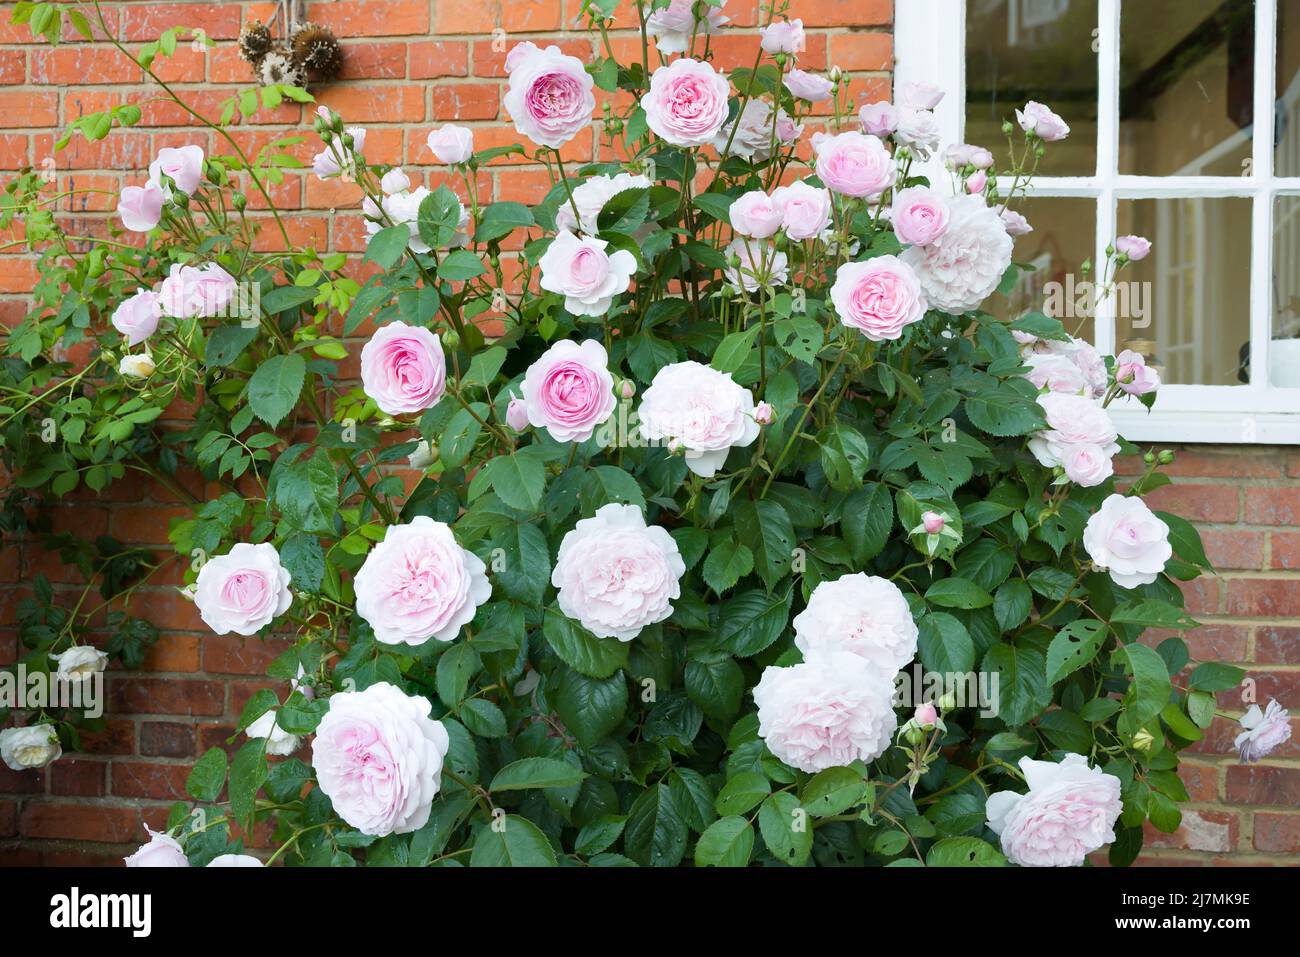 Rose bush, shrub plant with pink roses flowers growing in a UK garden Stock Photo